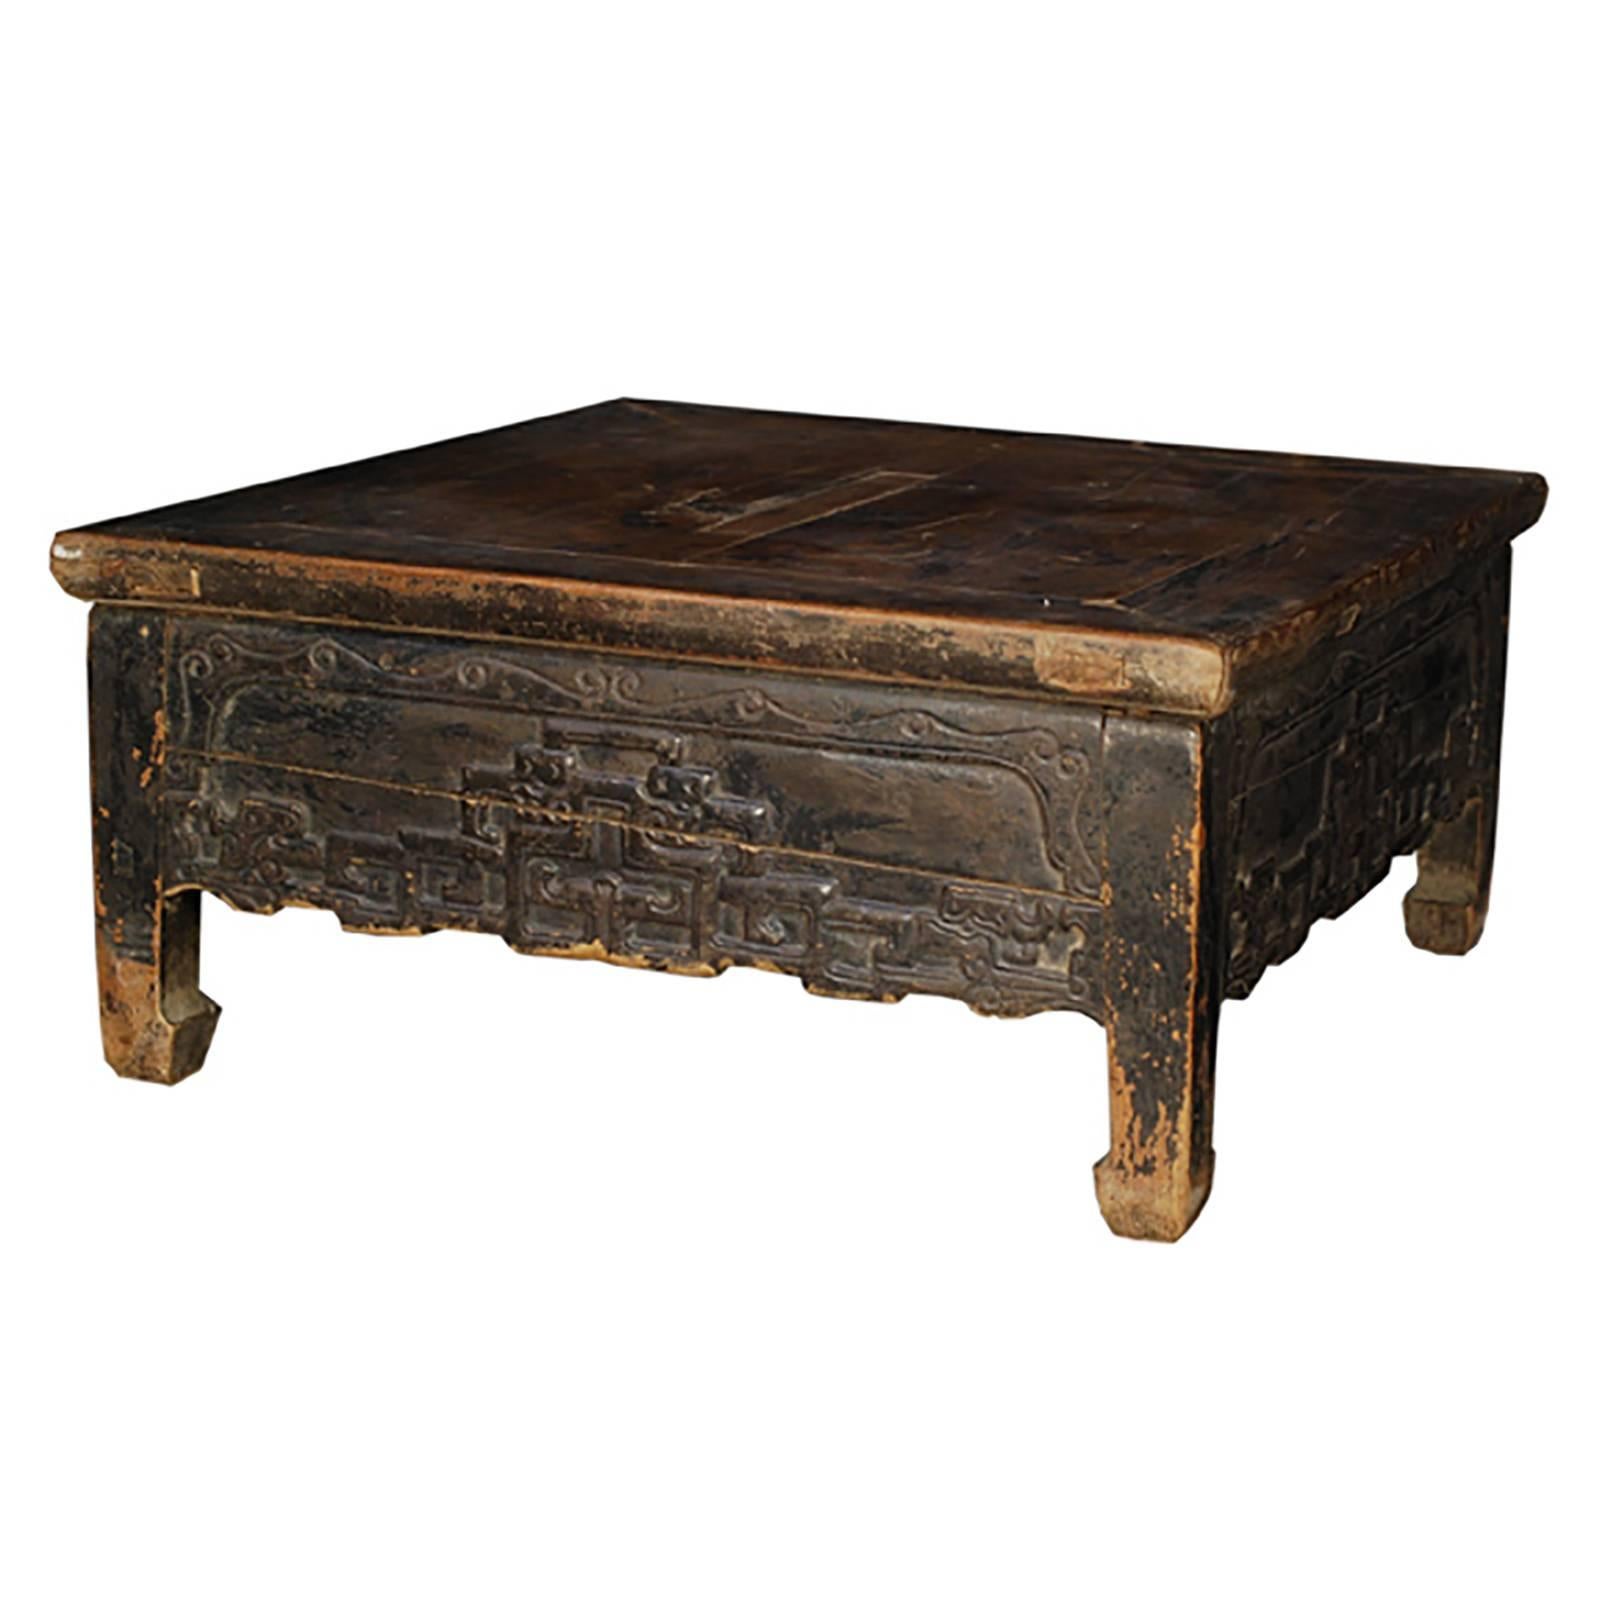 With its rustic, well-worn appearance, this low kang table has enjoyed decades of use as a platform for resting and socializing. Made of black-lacquered elmwood, the table showcases a delightful carved crooked dragon design on the apron and sturdy